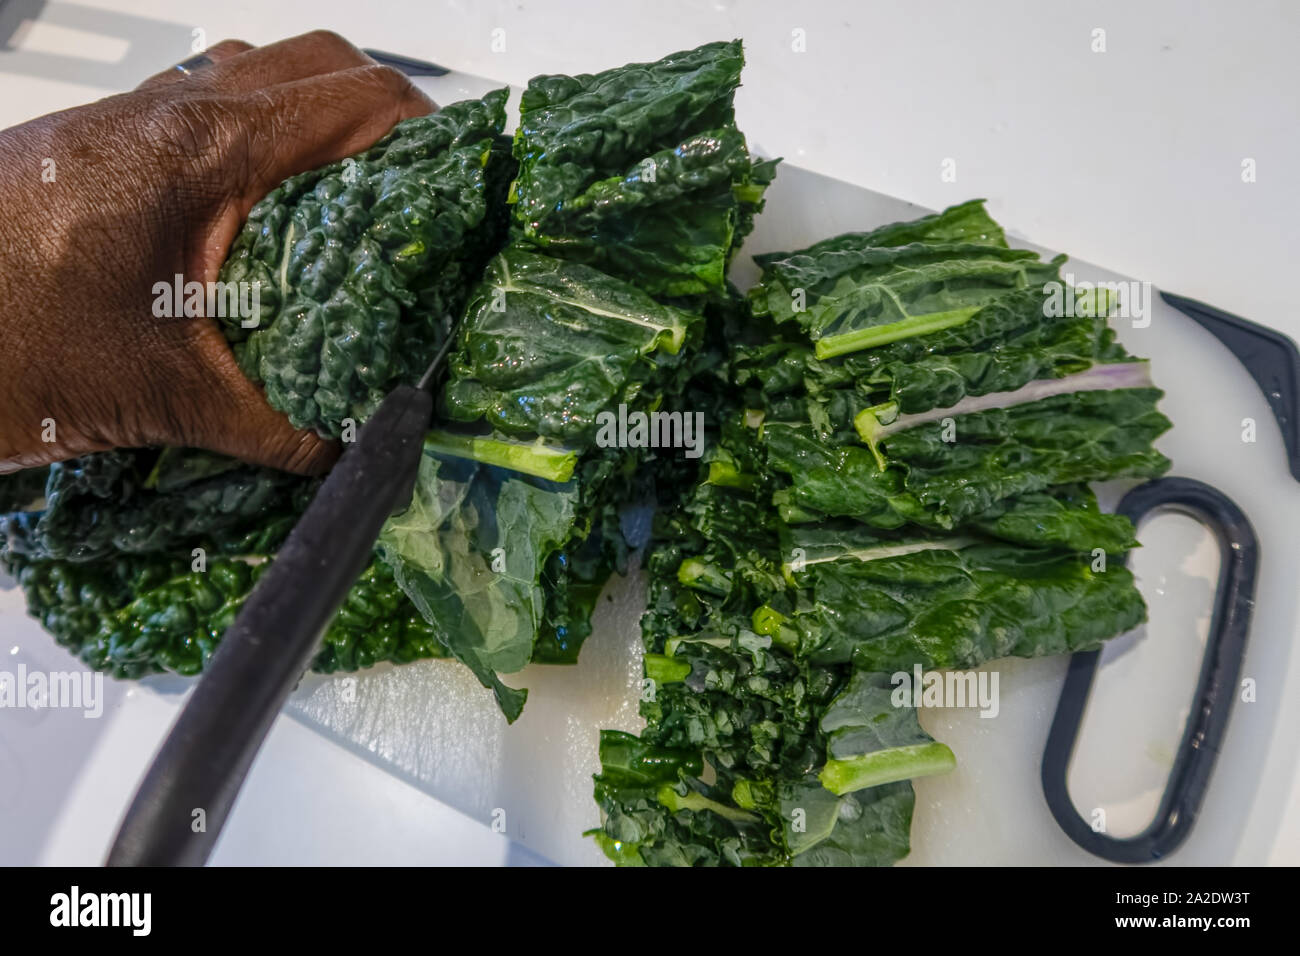 Cavolo nero being prepared in a kitchen environment Stock Photo